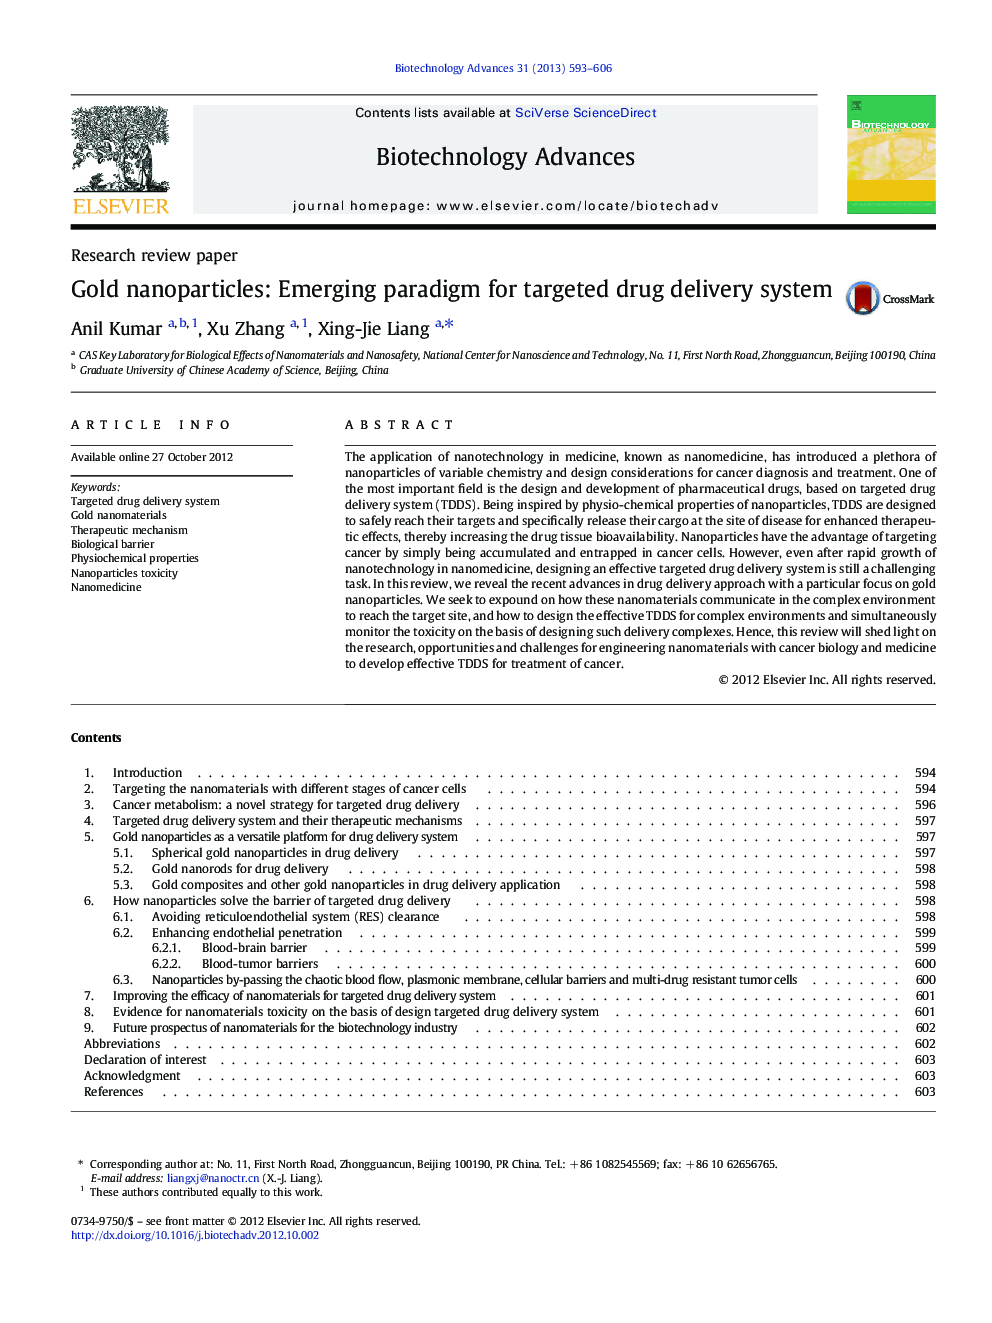 Gold nanoparticles: Emerging paradigm for targeted drug delivery system